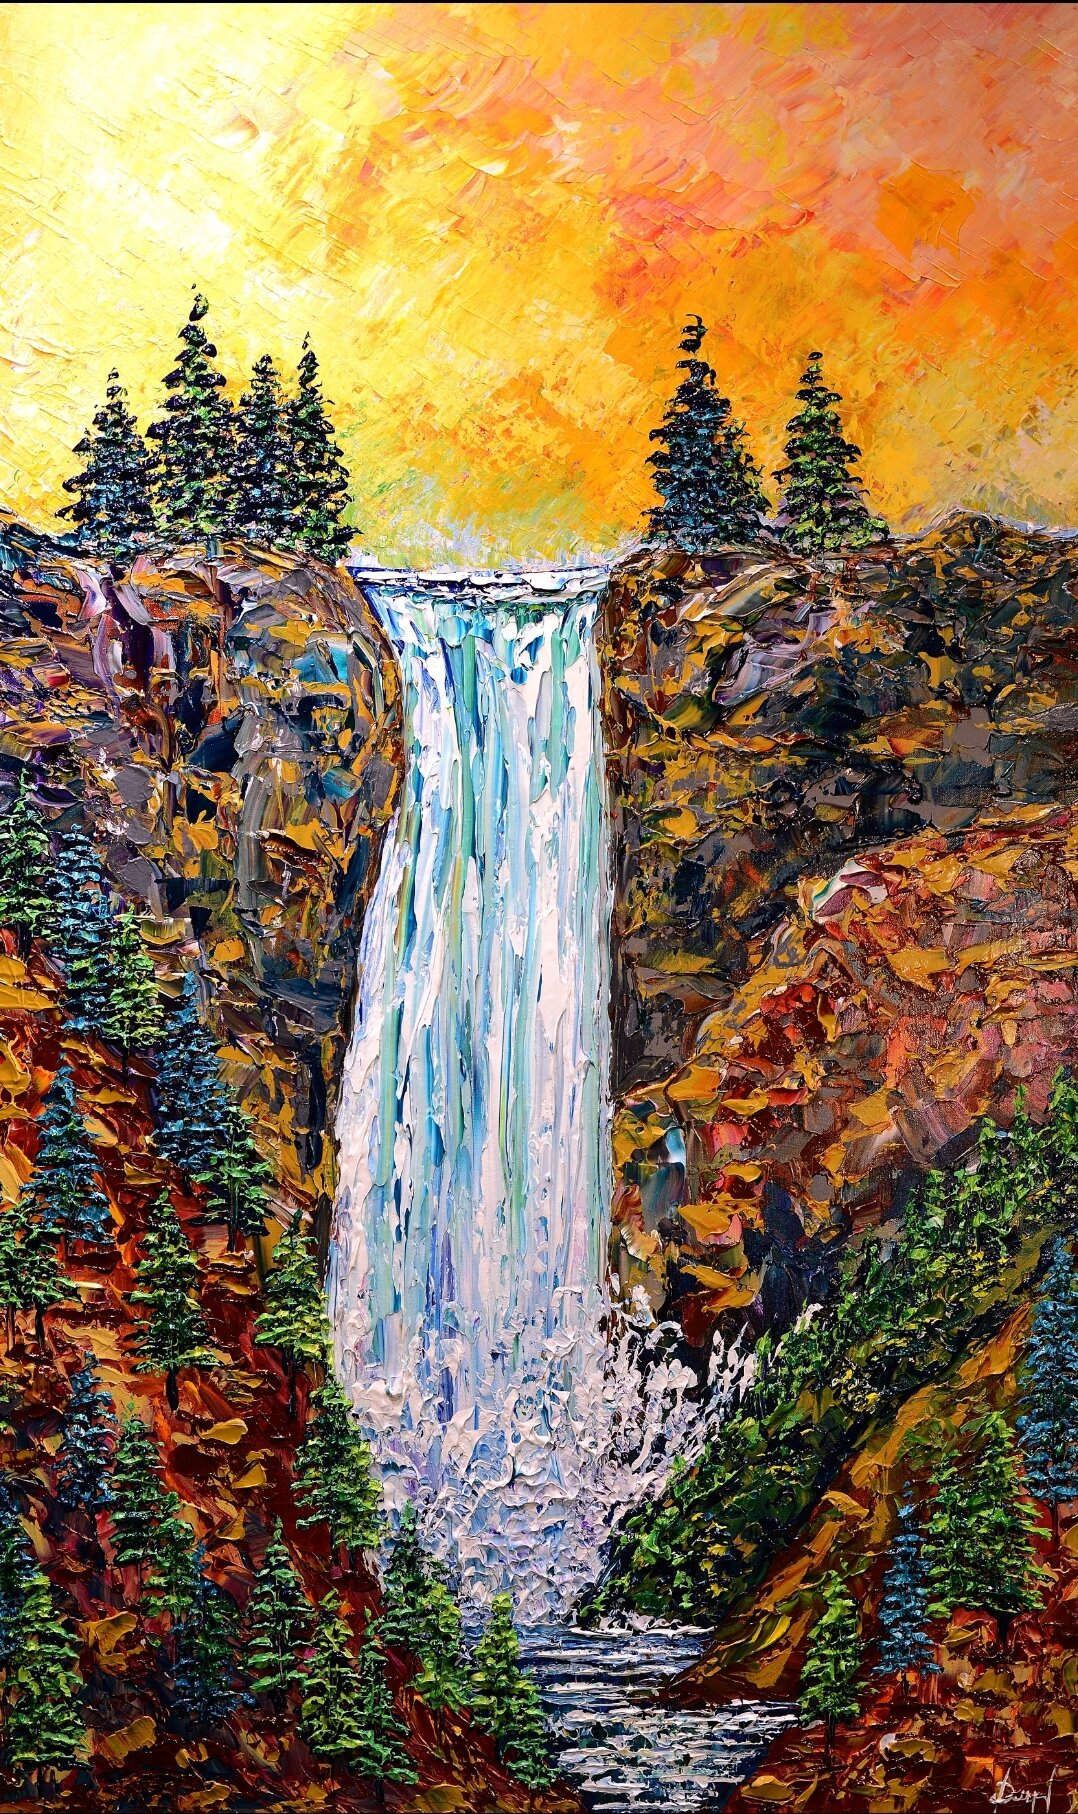 Nature's Sunset above the Waterfall 60x36